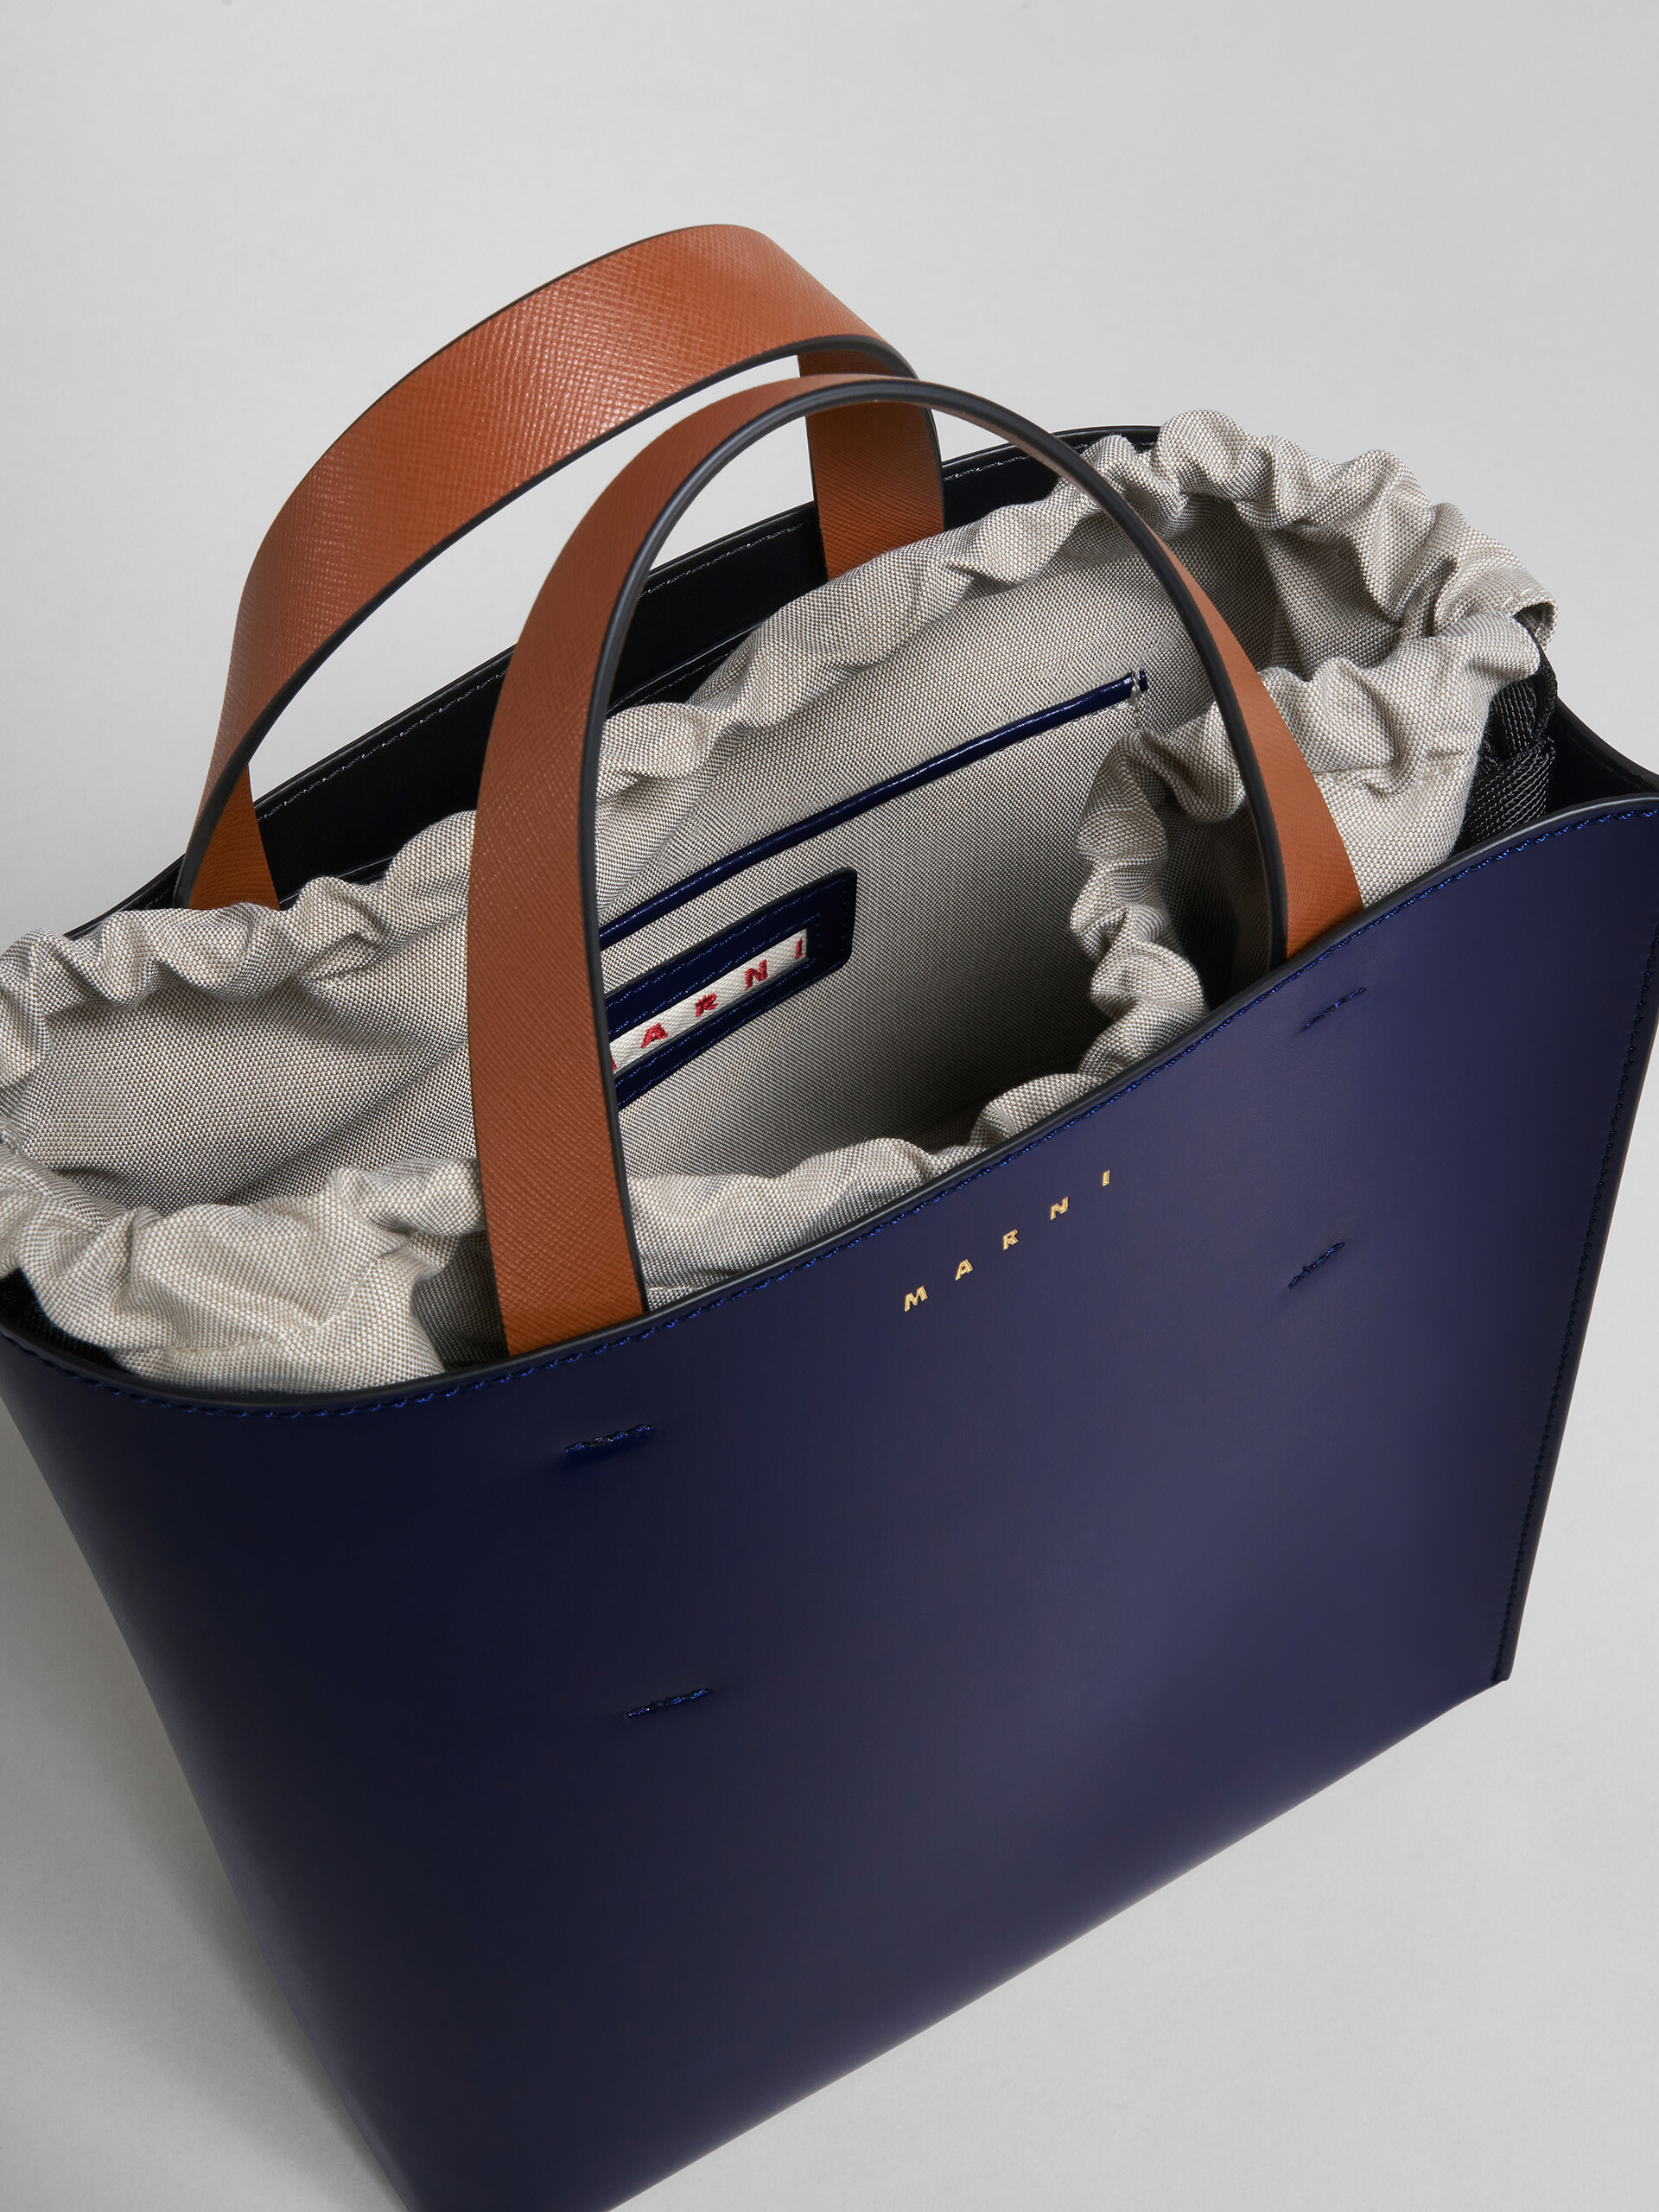 MUSEO small bag in blue and white leather - Shopping Bags - Image 4